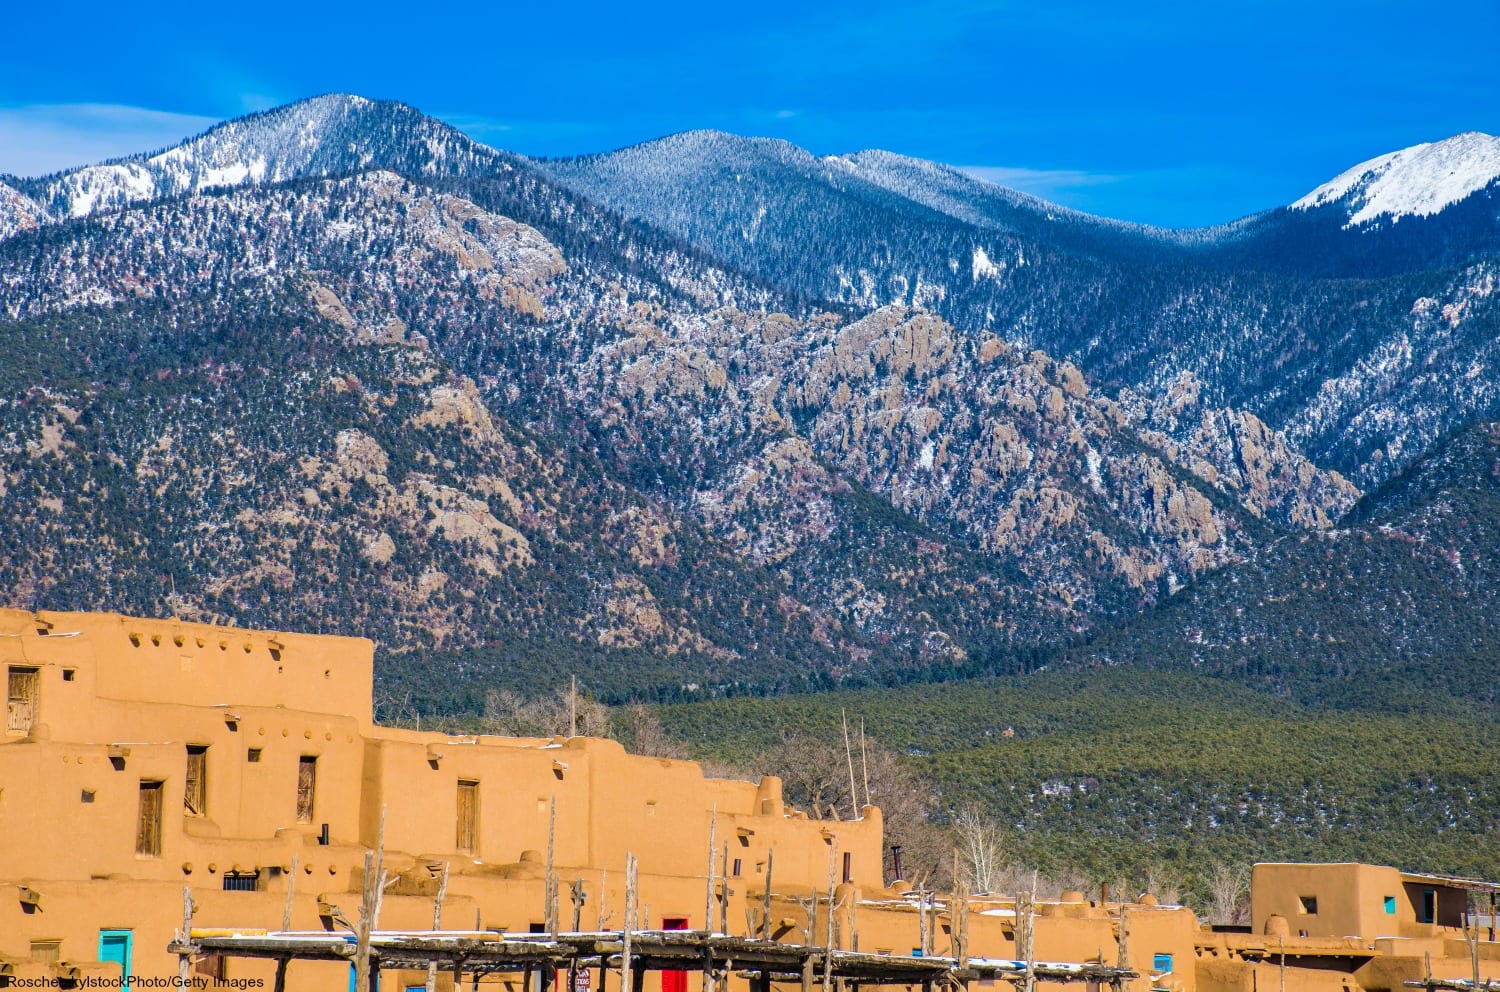 Things to Do in Taos, NM